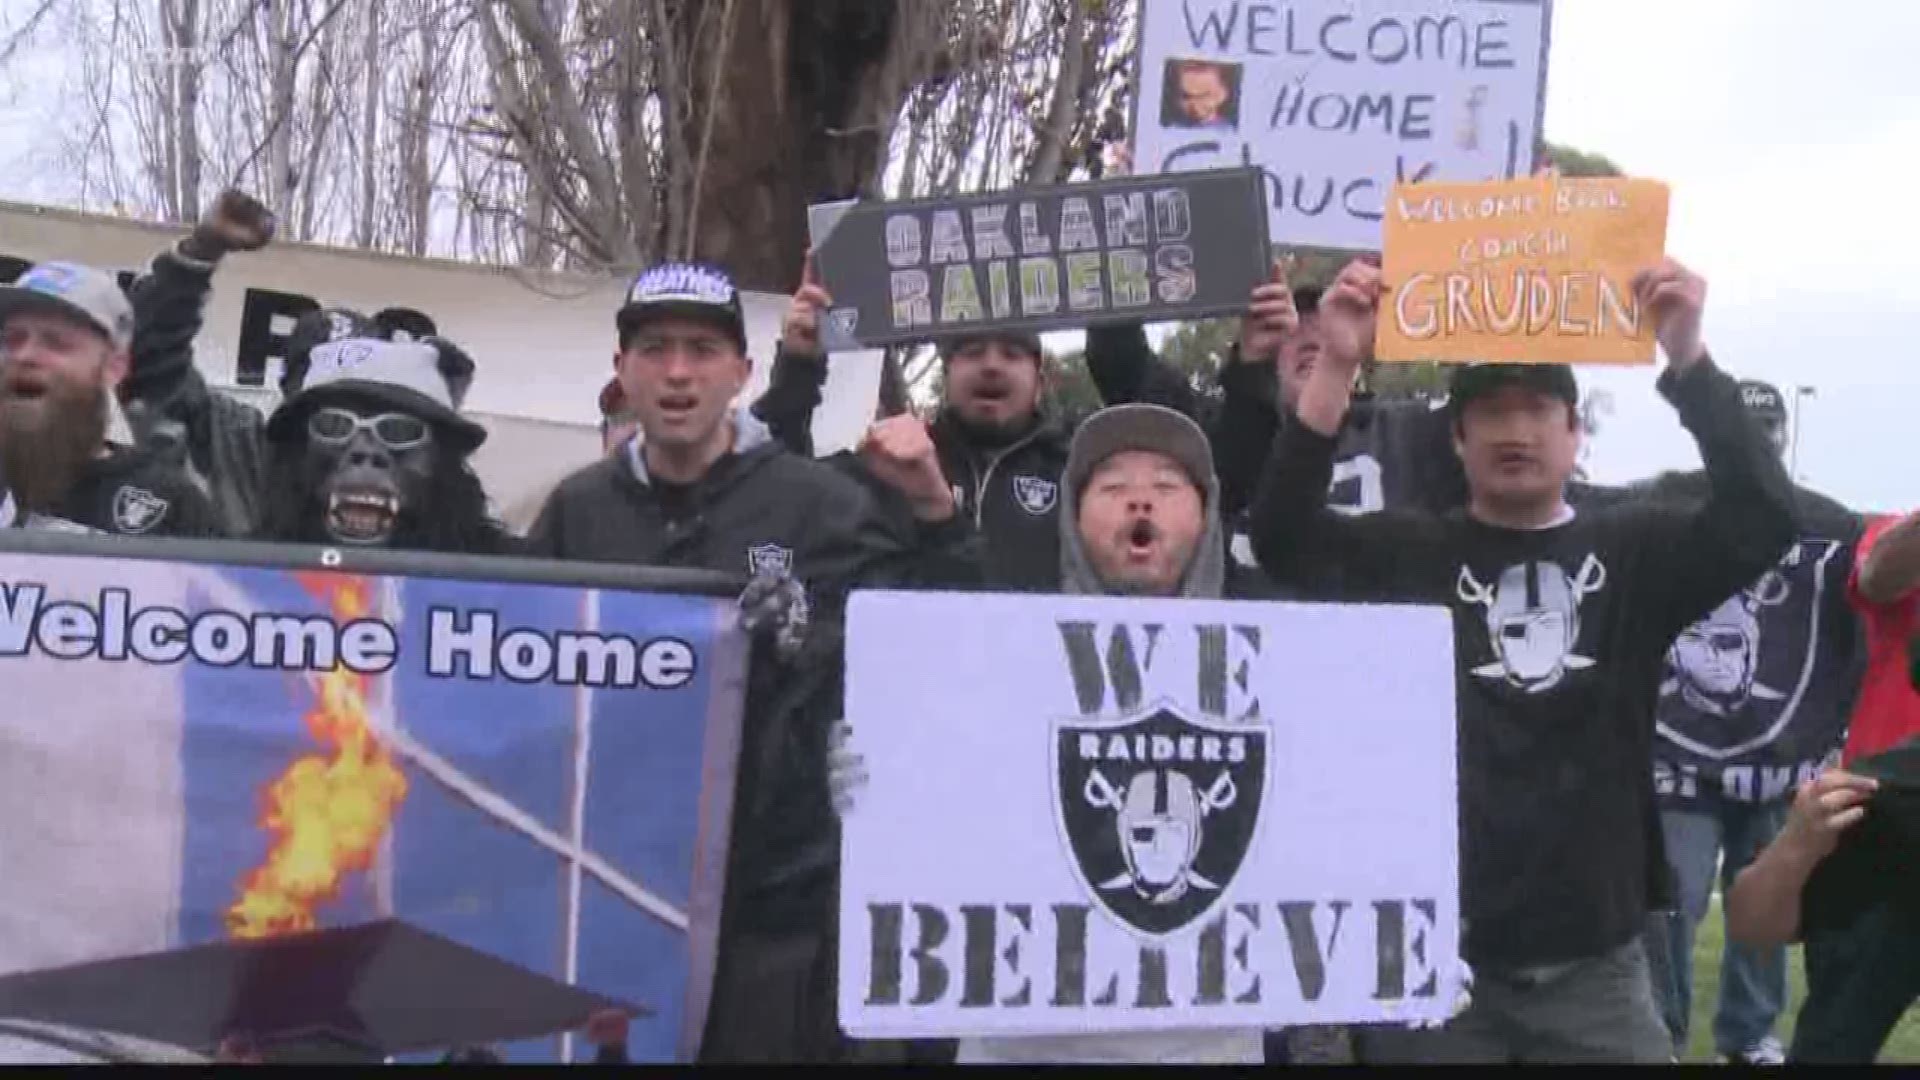 Former Oakland Raiders players come together to support new head coach (January 9, 2018)